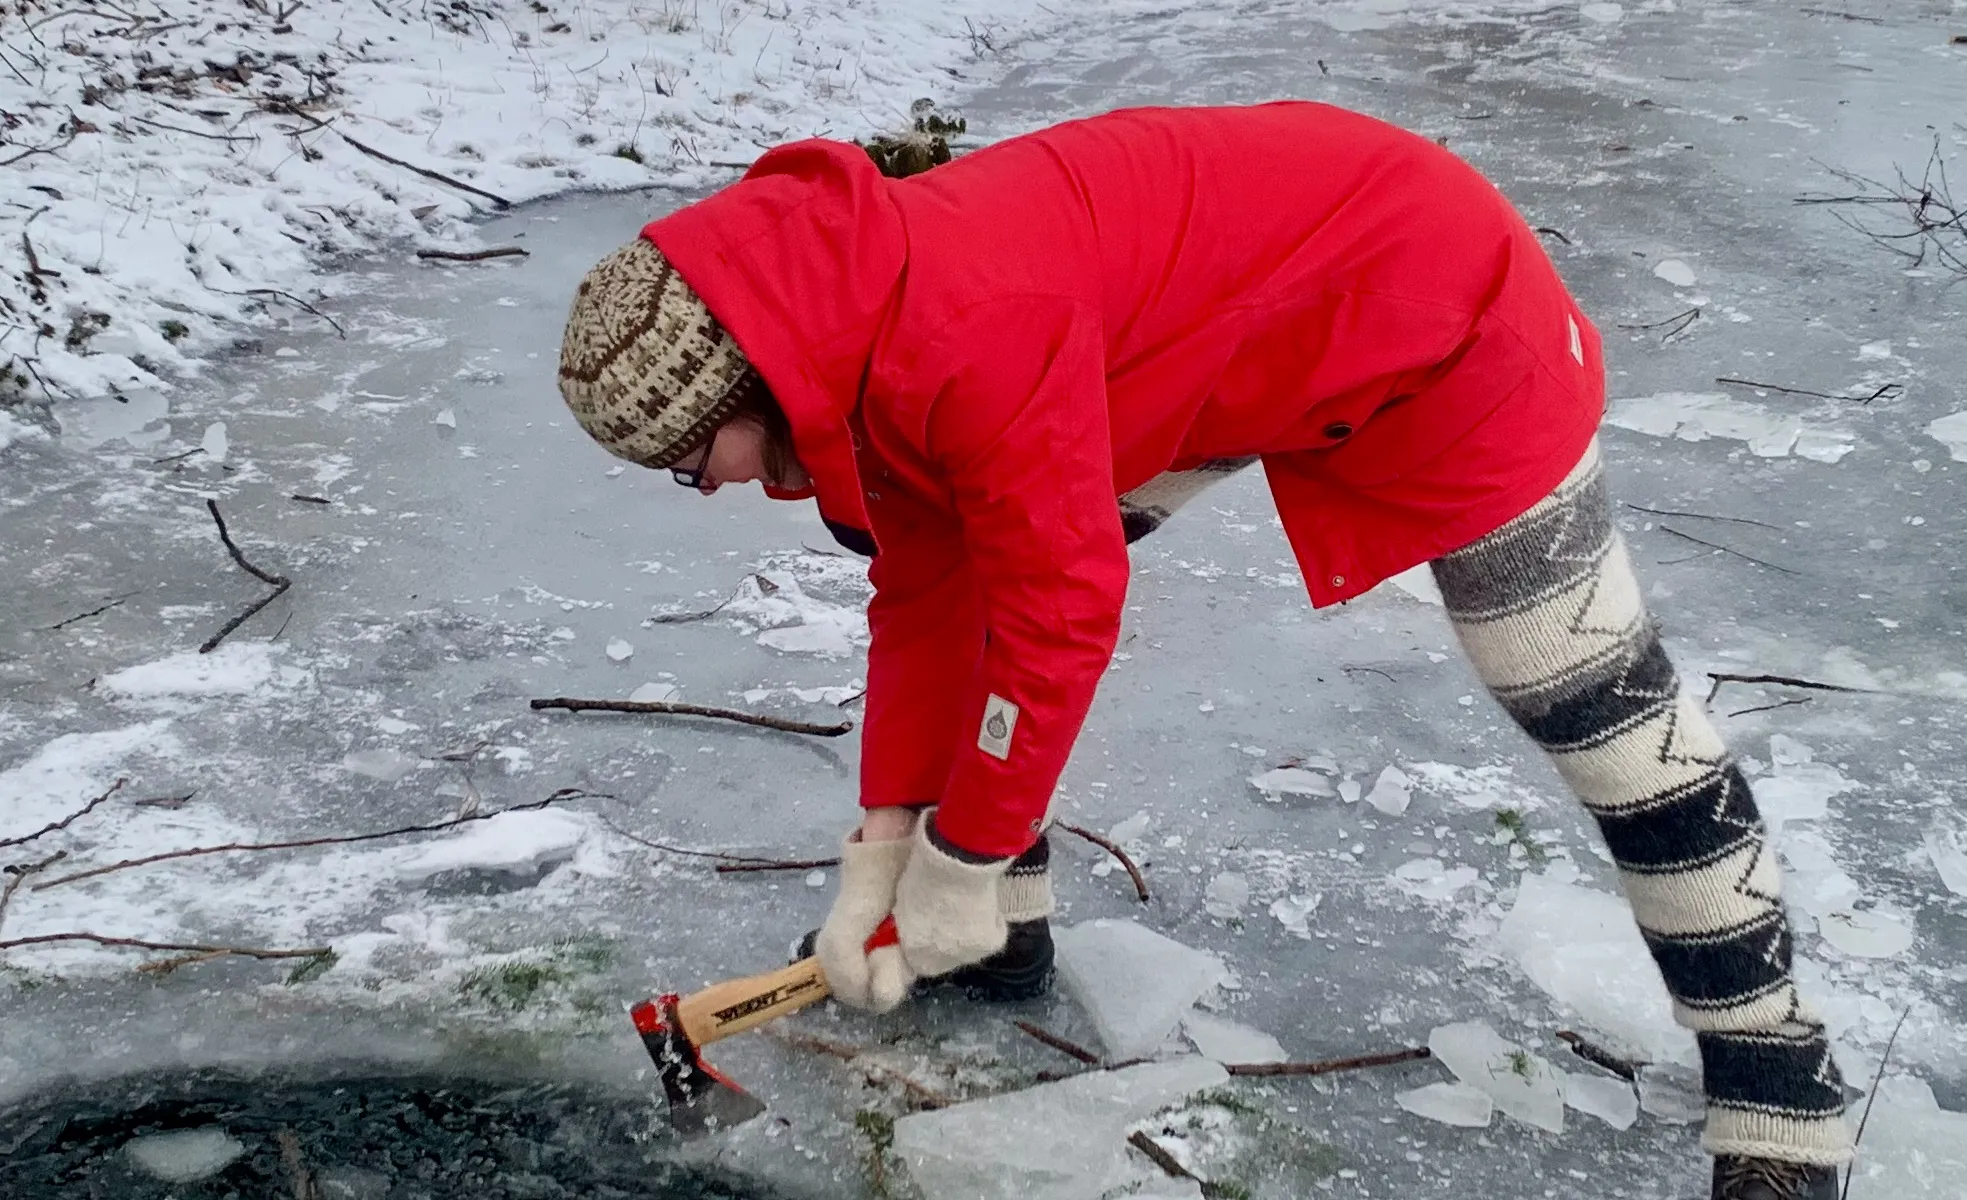 A woman in a red coat, knitted wool pants, and a knitted wool hat uses a hatchet to break the ice on a frozen lake.